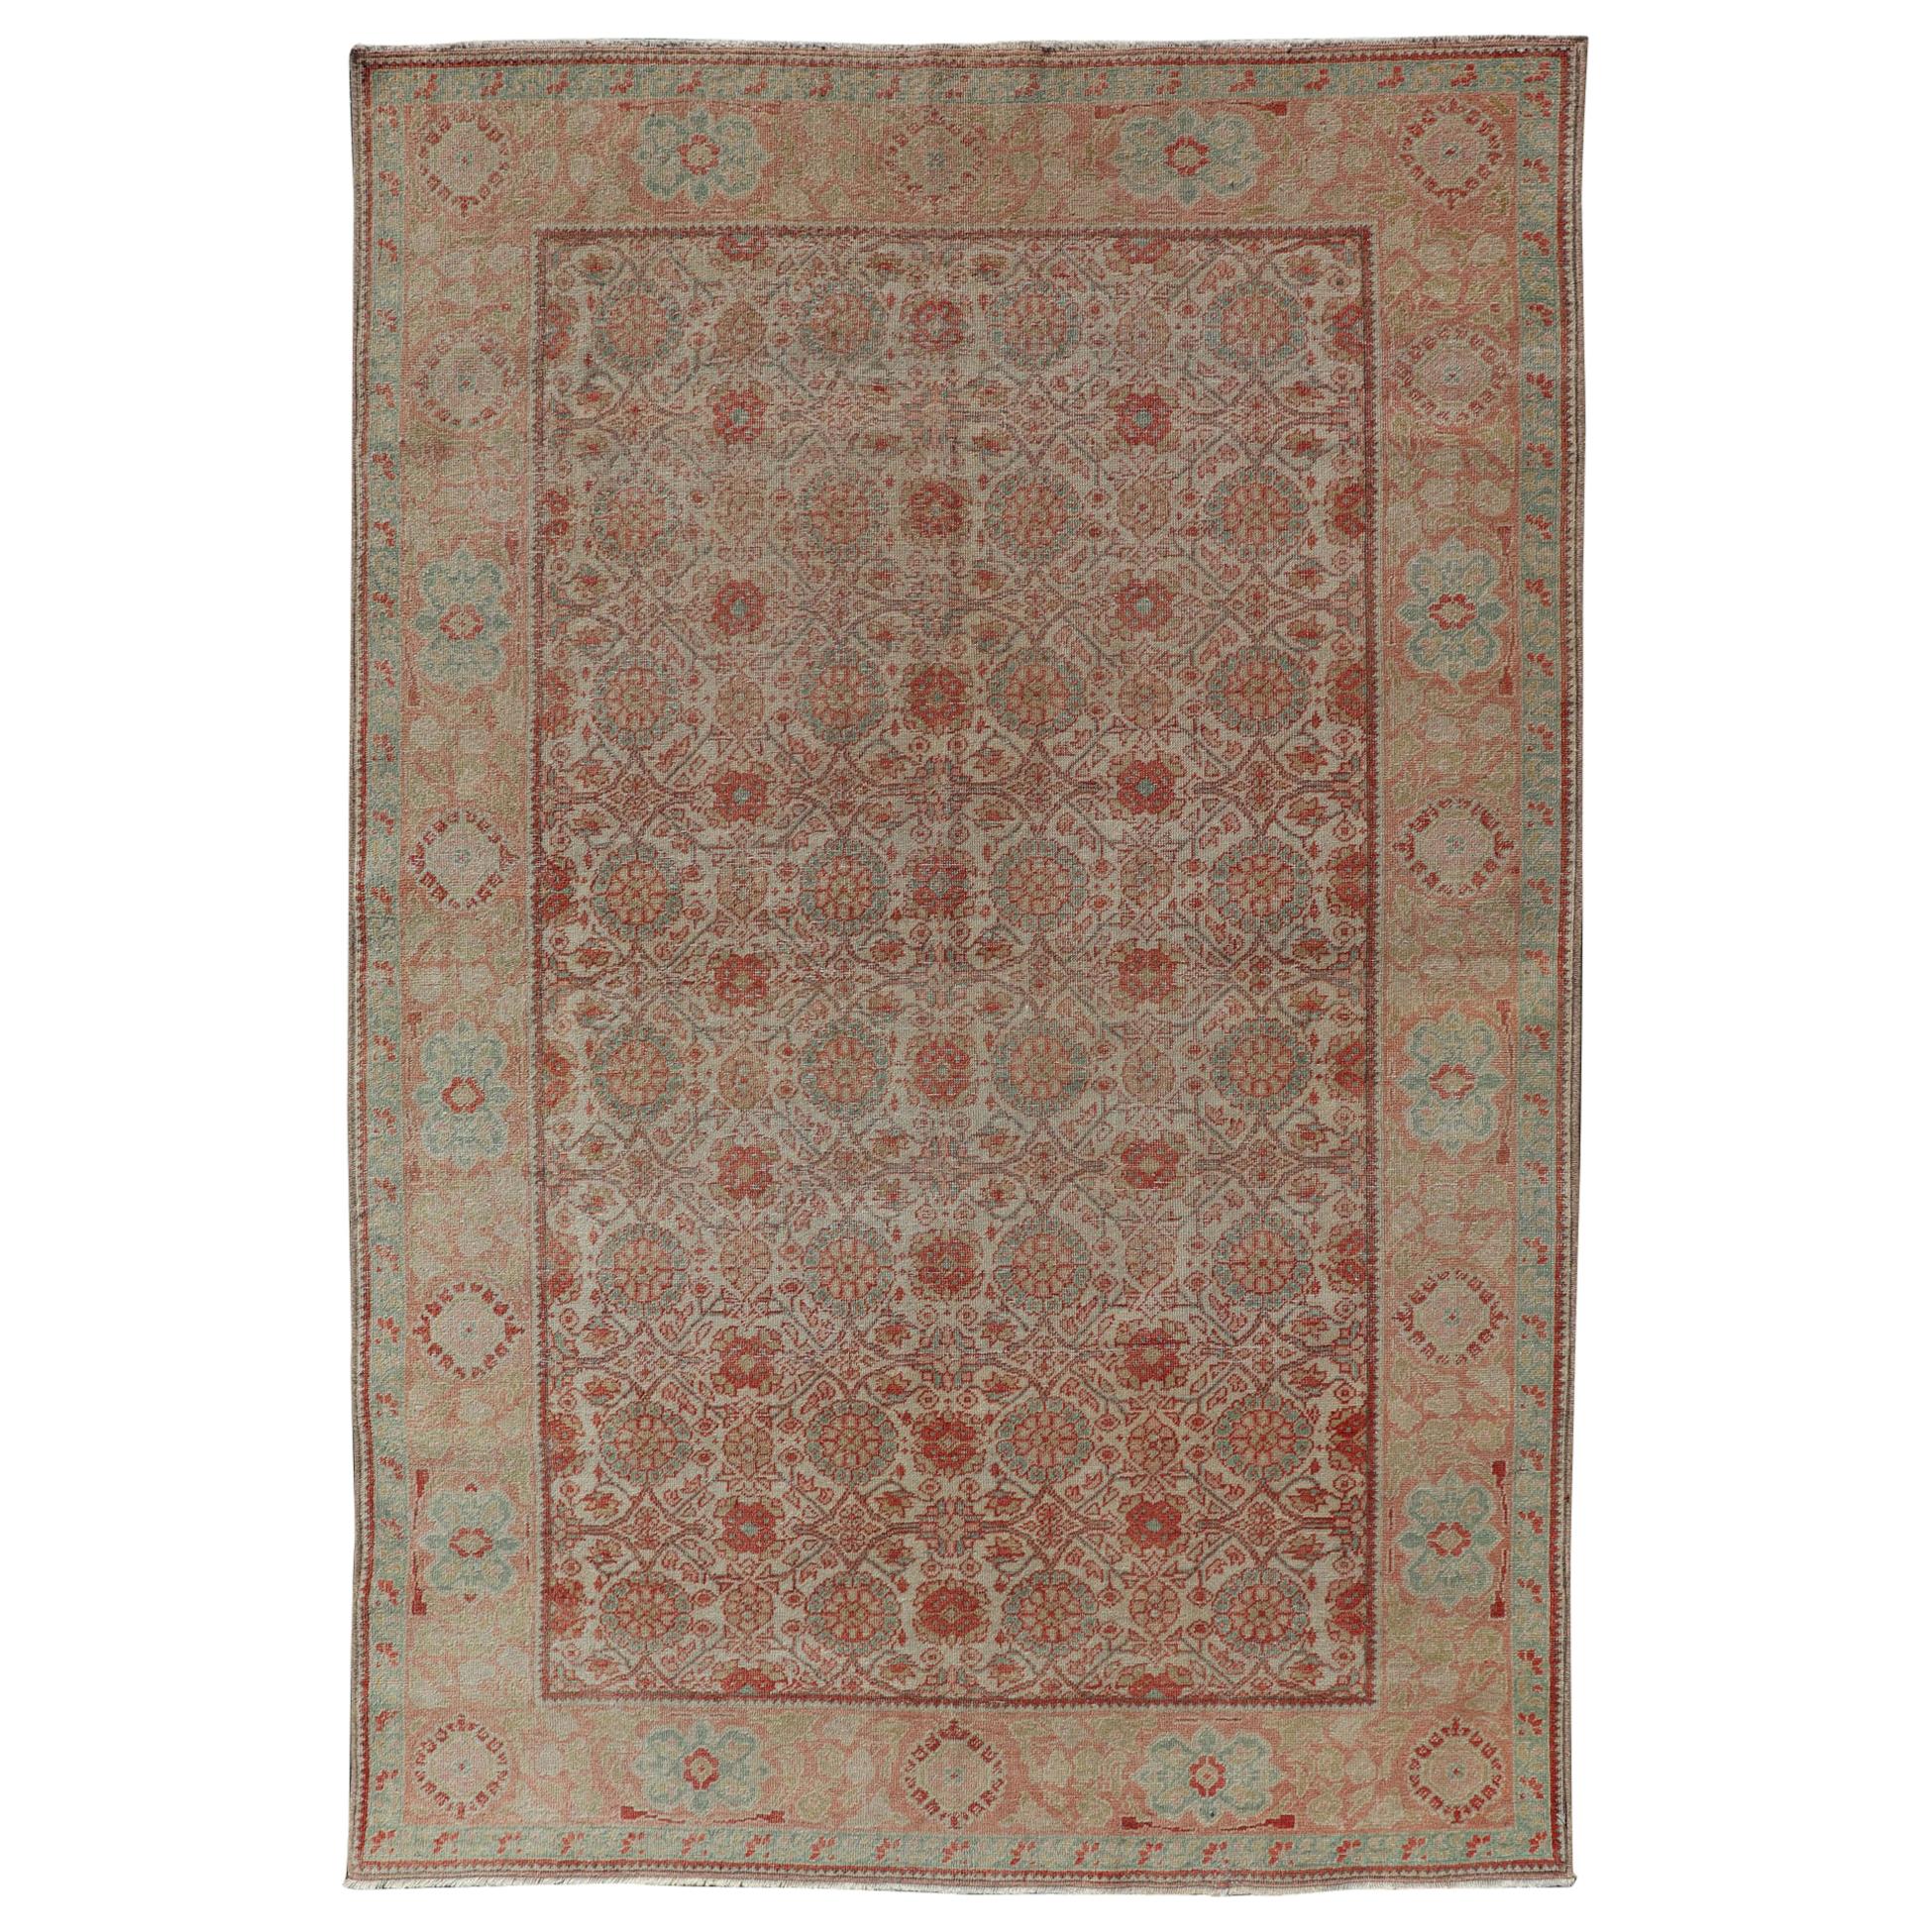 Persian Tabriz Rug with Boteh Design in Cream, Coral, Light Green/ Blue